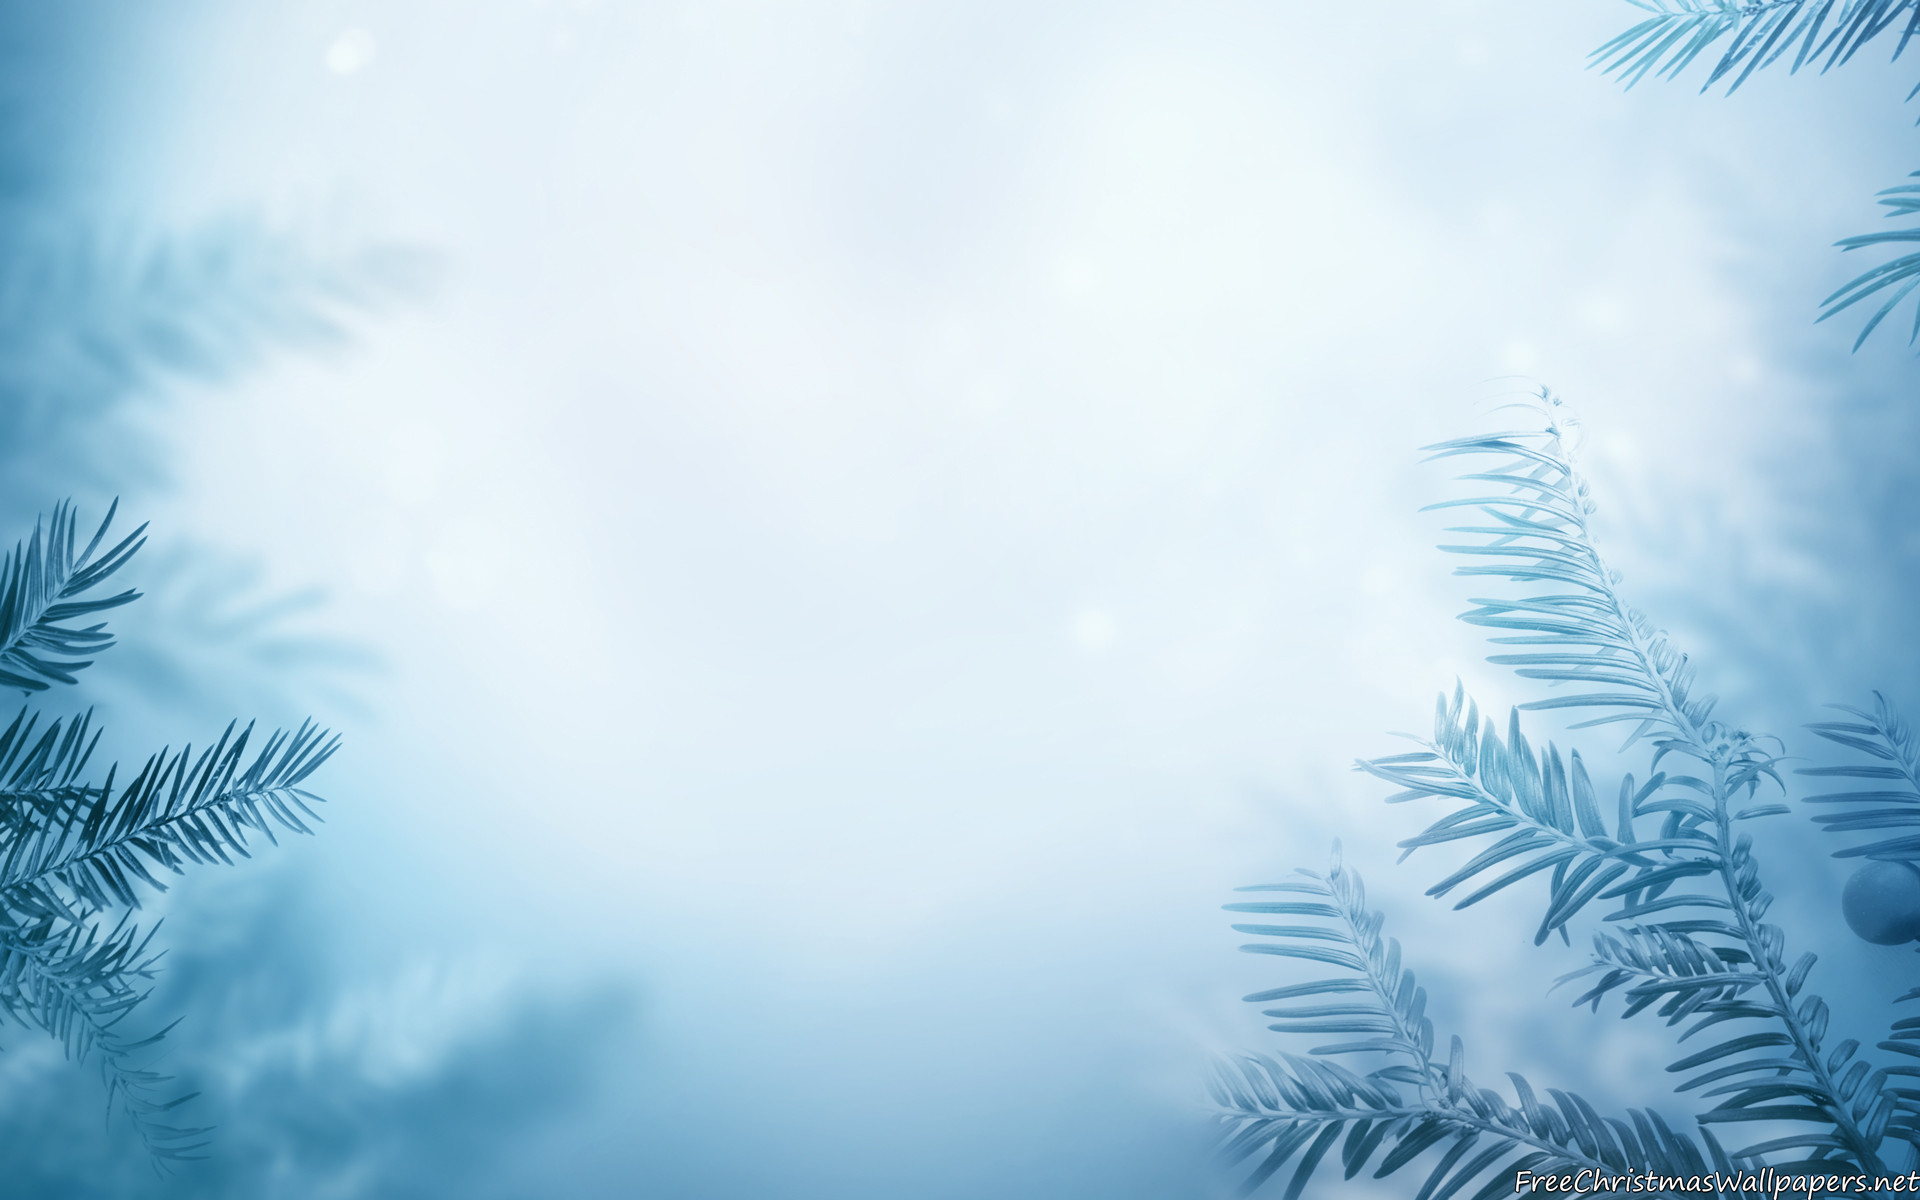 Winter Background With Frozen Trees Wallpaper